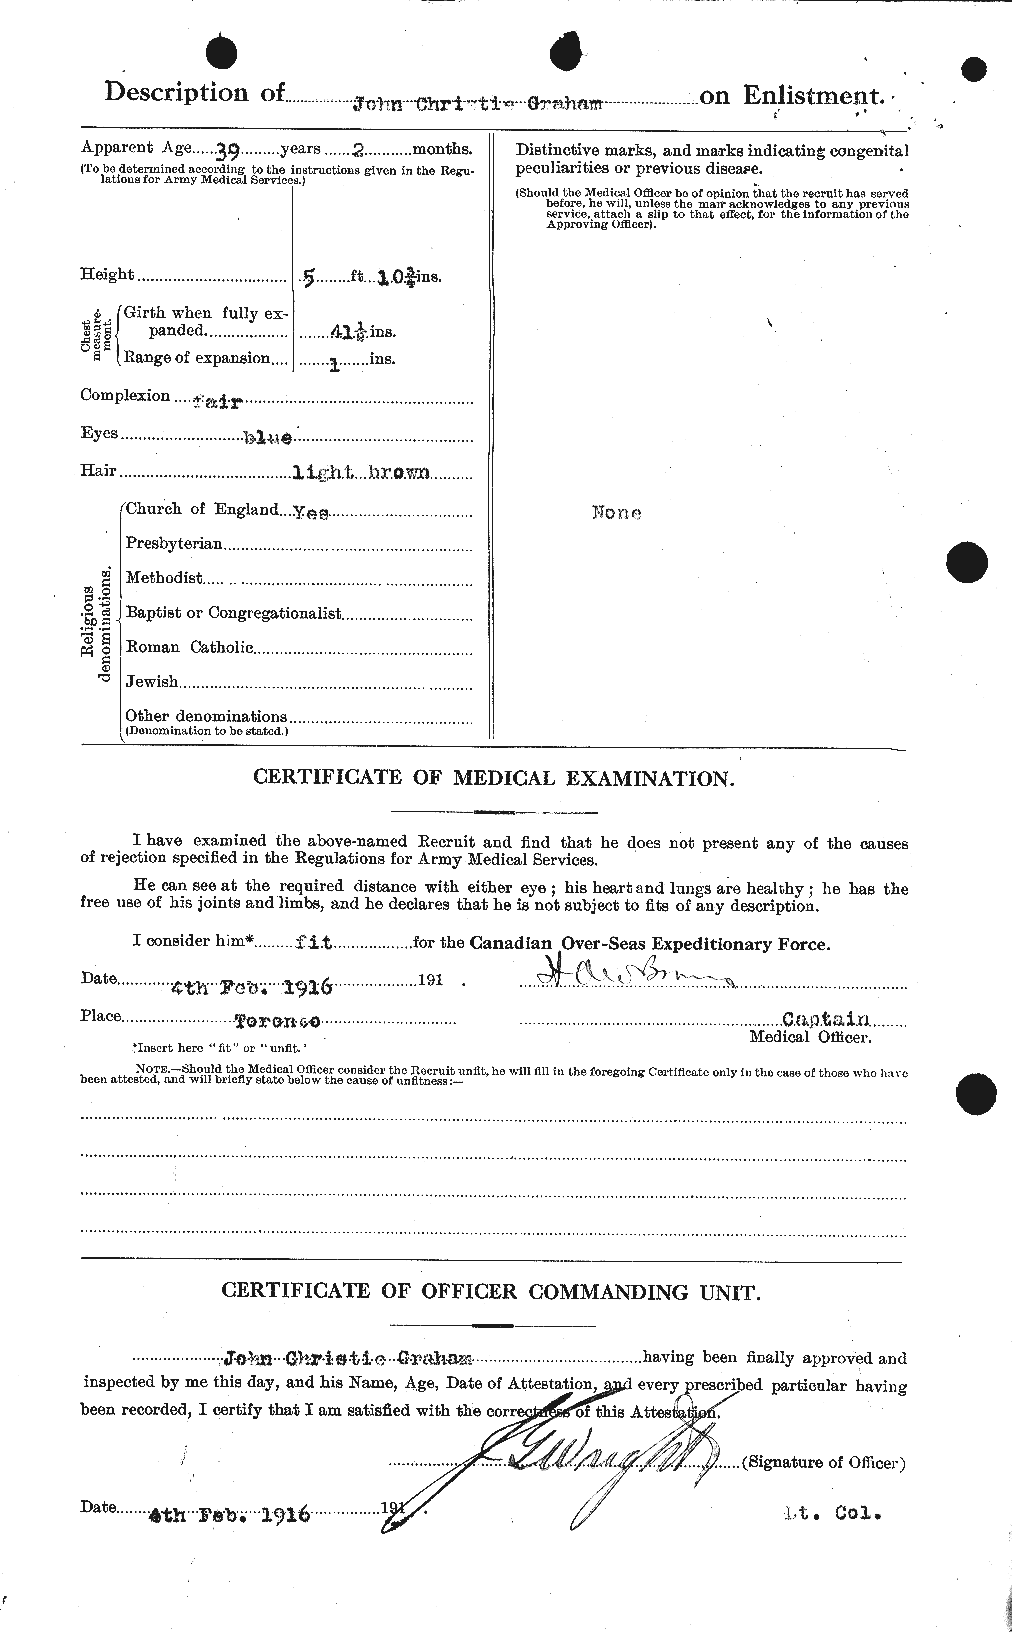 Personnel Records of the First World War - CEF 359161b